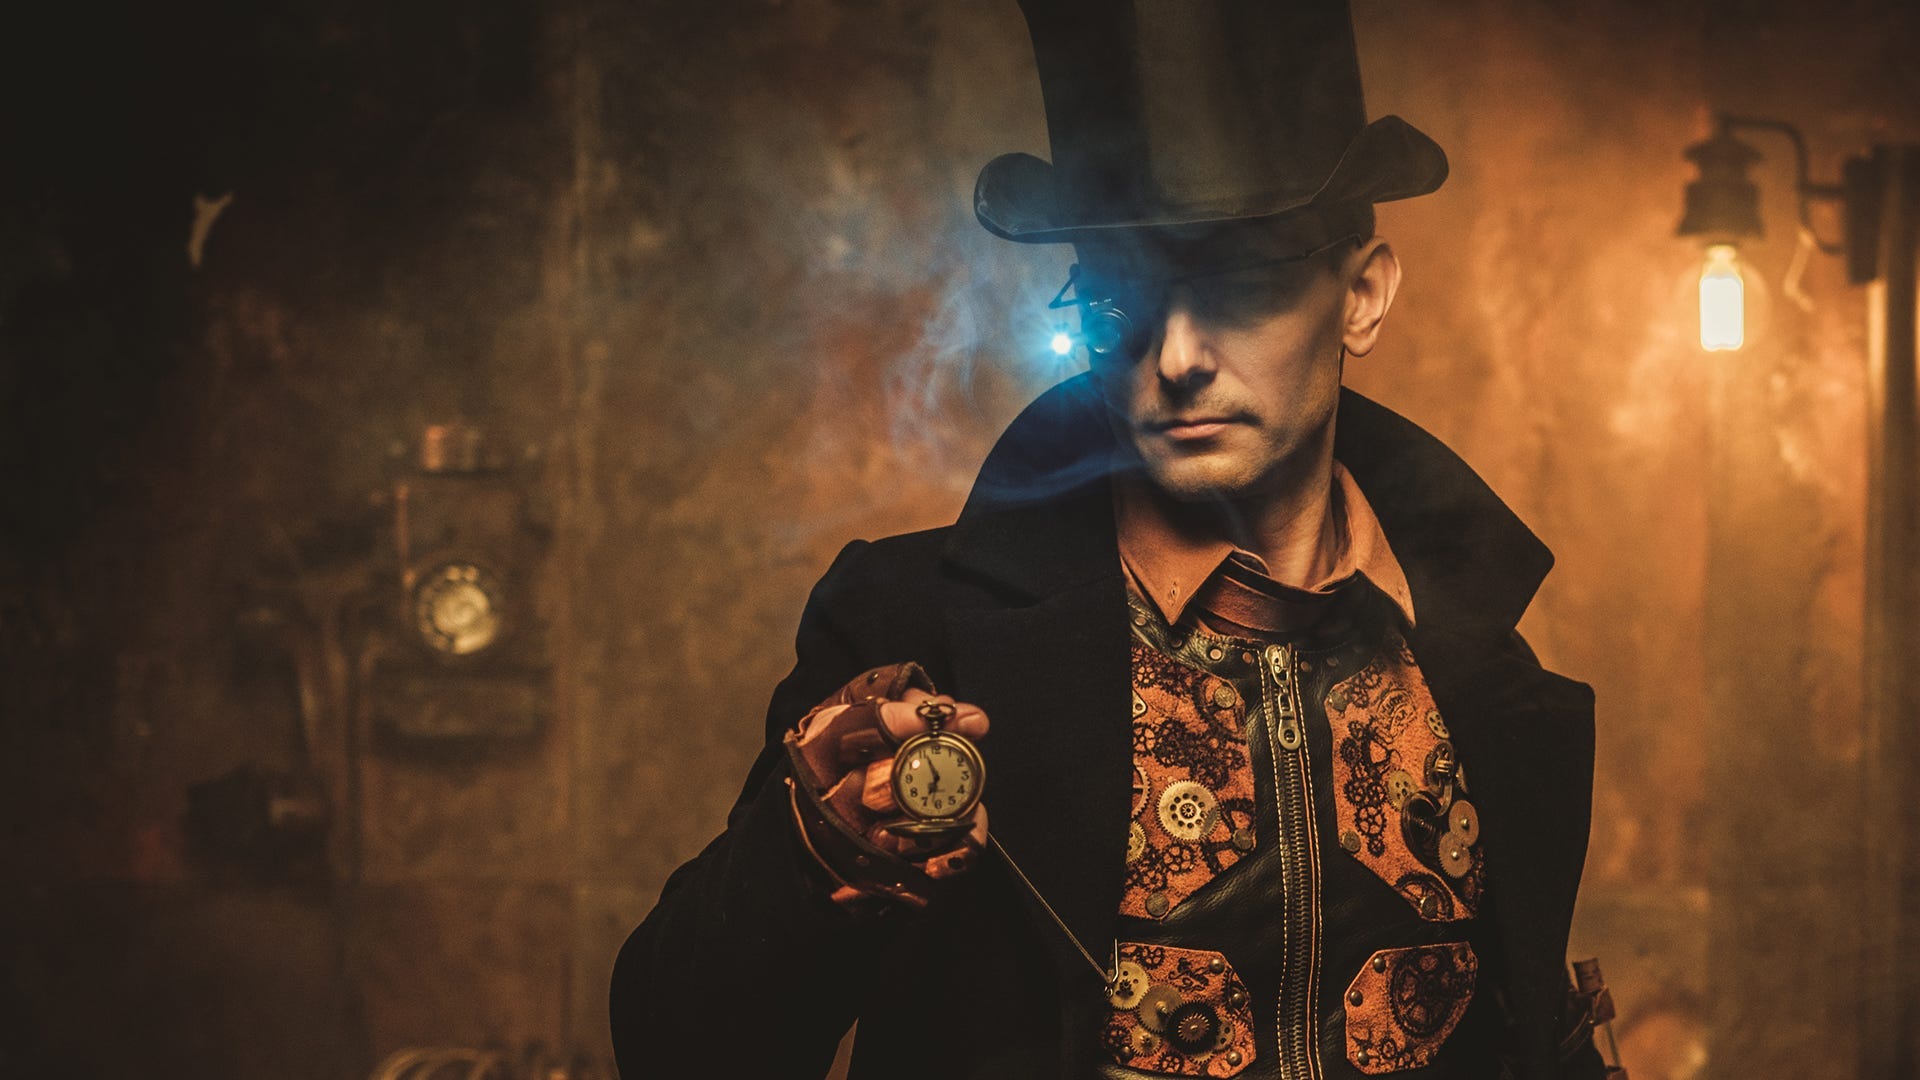 Steampunk image of Time Master with a watch